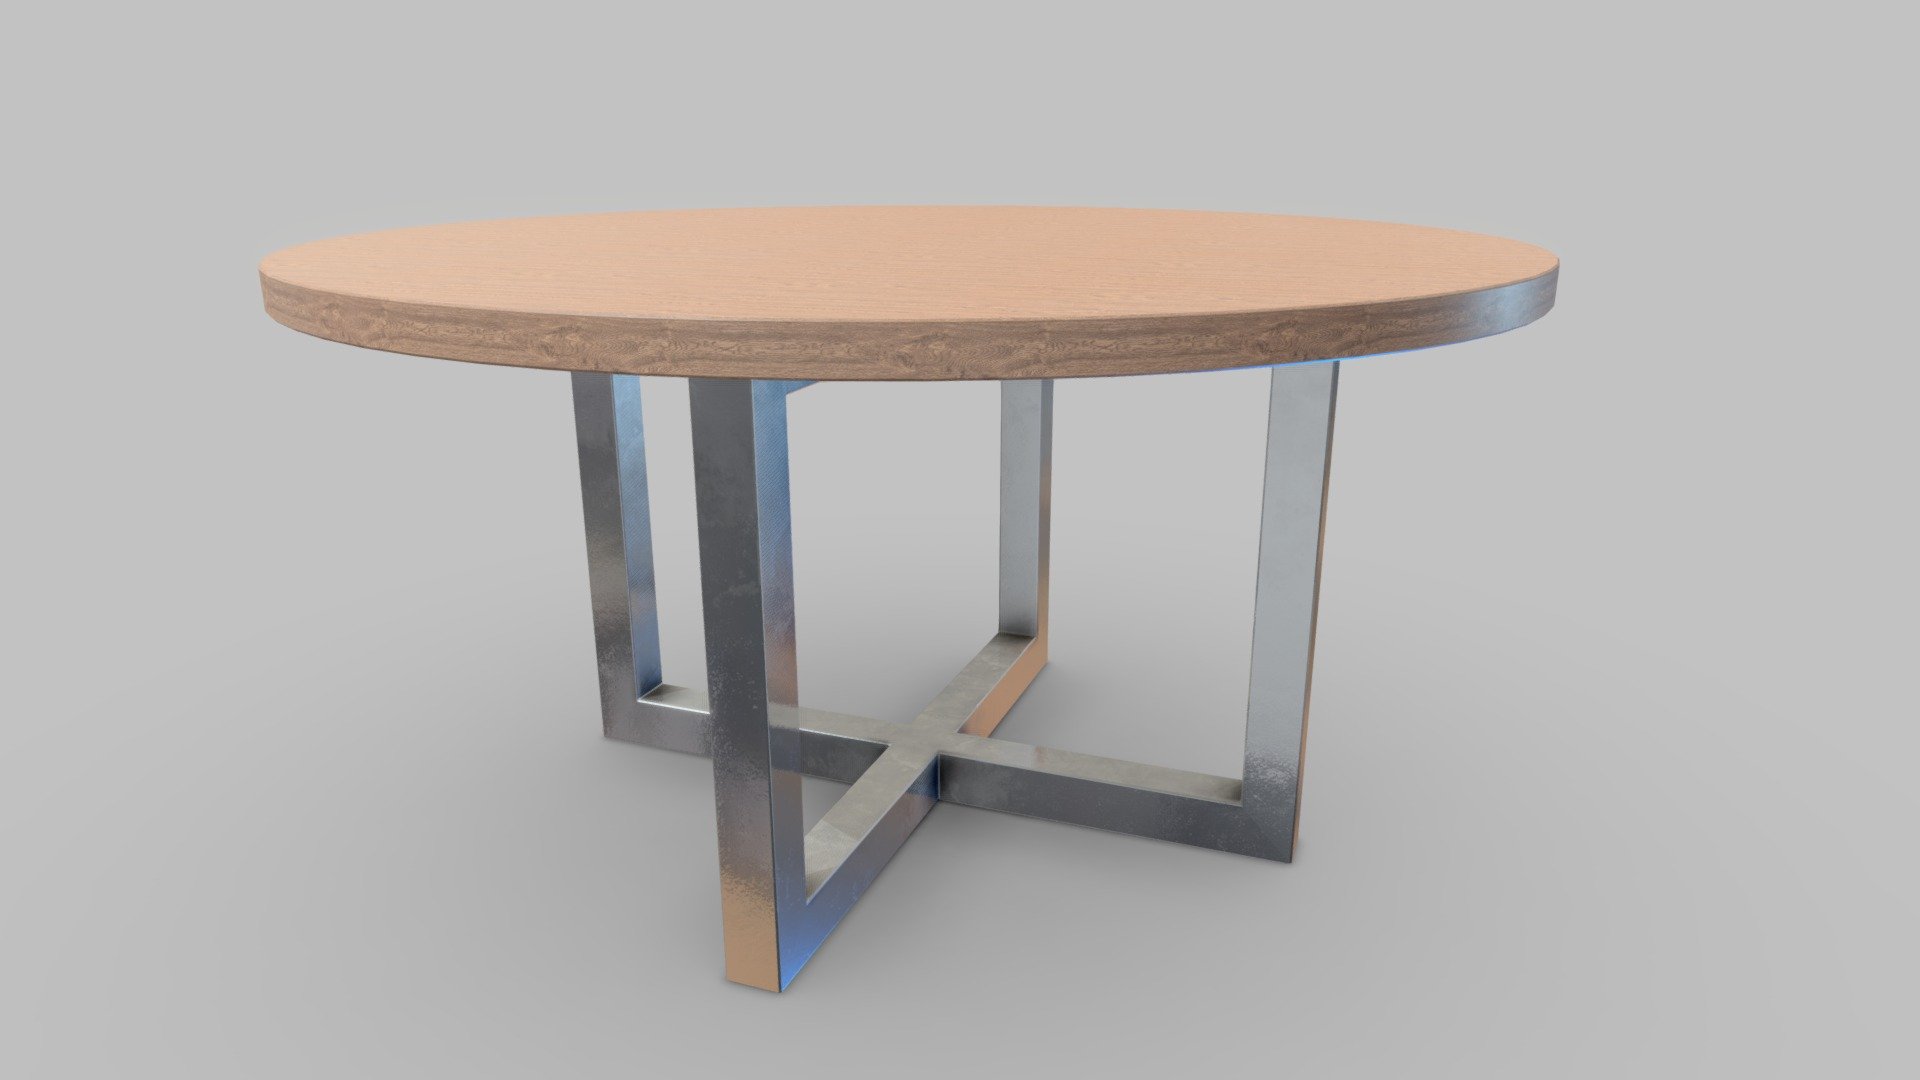 Round Table 3D model with PBR maps 4096x4096 such as: • BaseColor • Metallic • Roughness •  Ambient Occlusion • NormalDirectX • NormalOpenGL •
 Model in real scale (meters) - Round Table Low-poly 3D model - Buy Royalty Free 3D model by Andrew.Maria 3d model